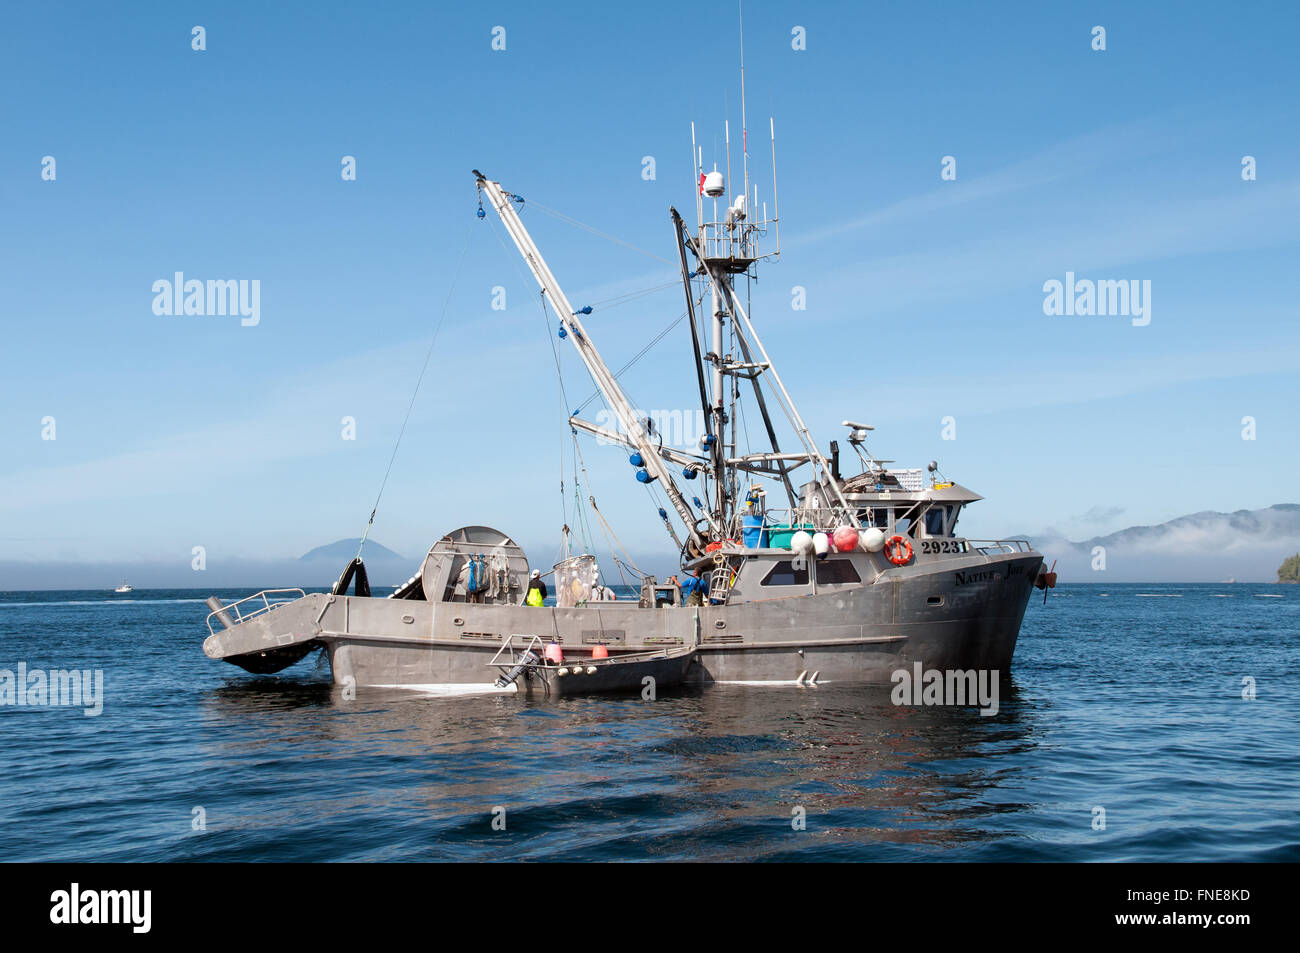 A wild salmon gillnet fishing boat in the Great Bear Rainforest region on the North Pacific coast of British Columbia, Canada. Stock Photo